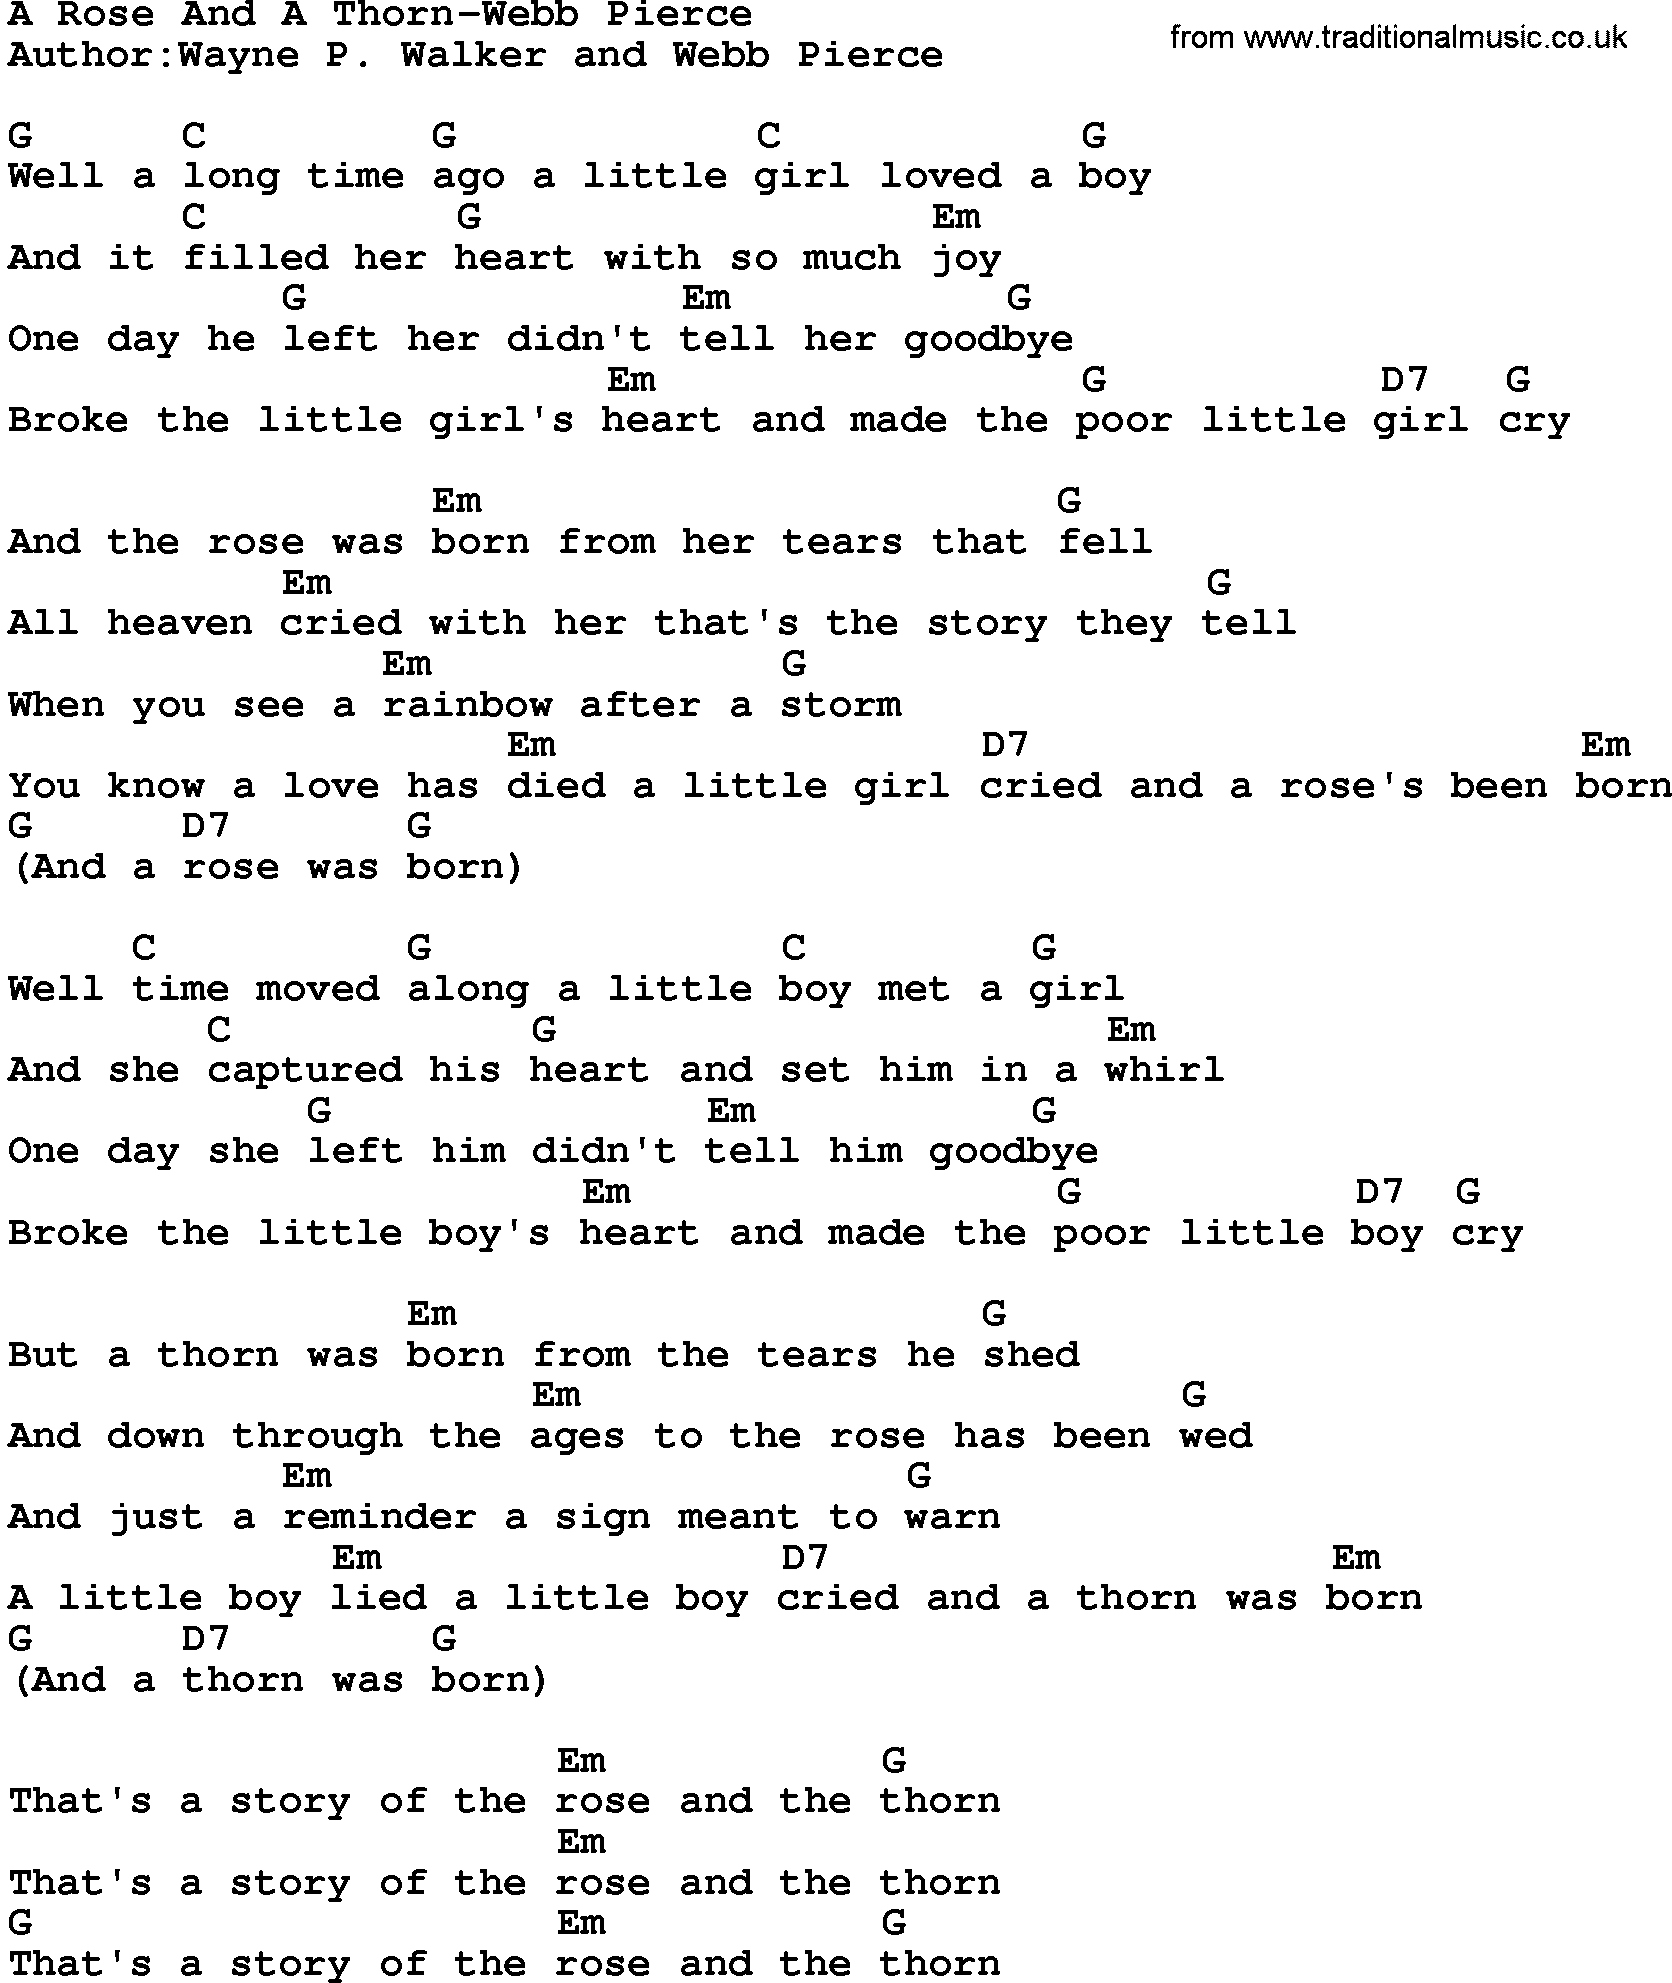 Country music song: A Rose And A Thorn-Webb Pierce lyrics and chords